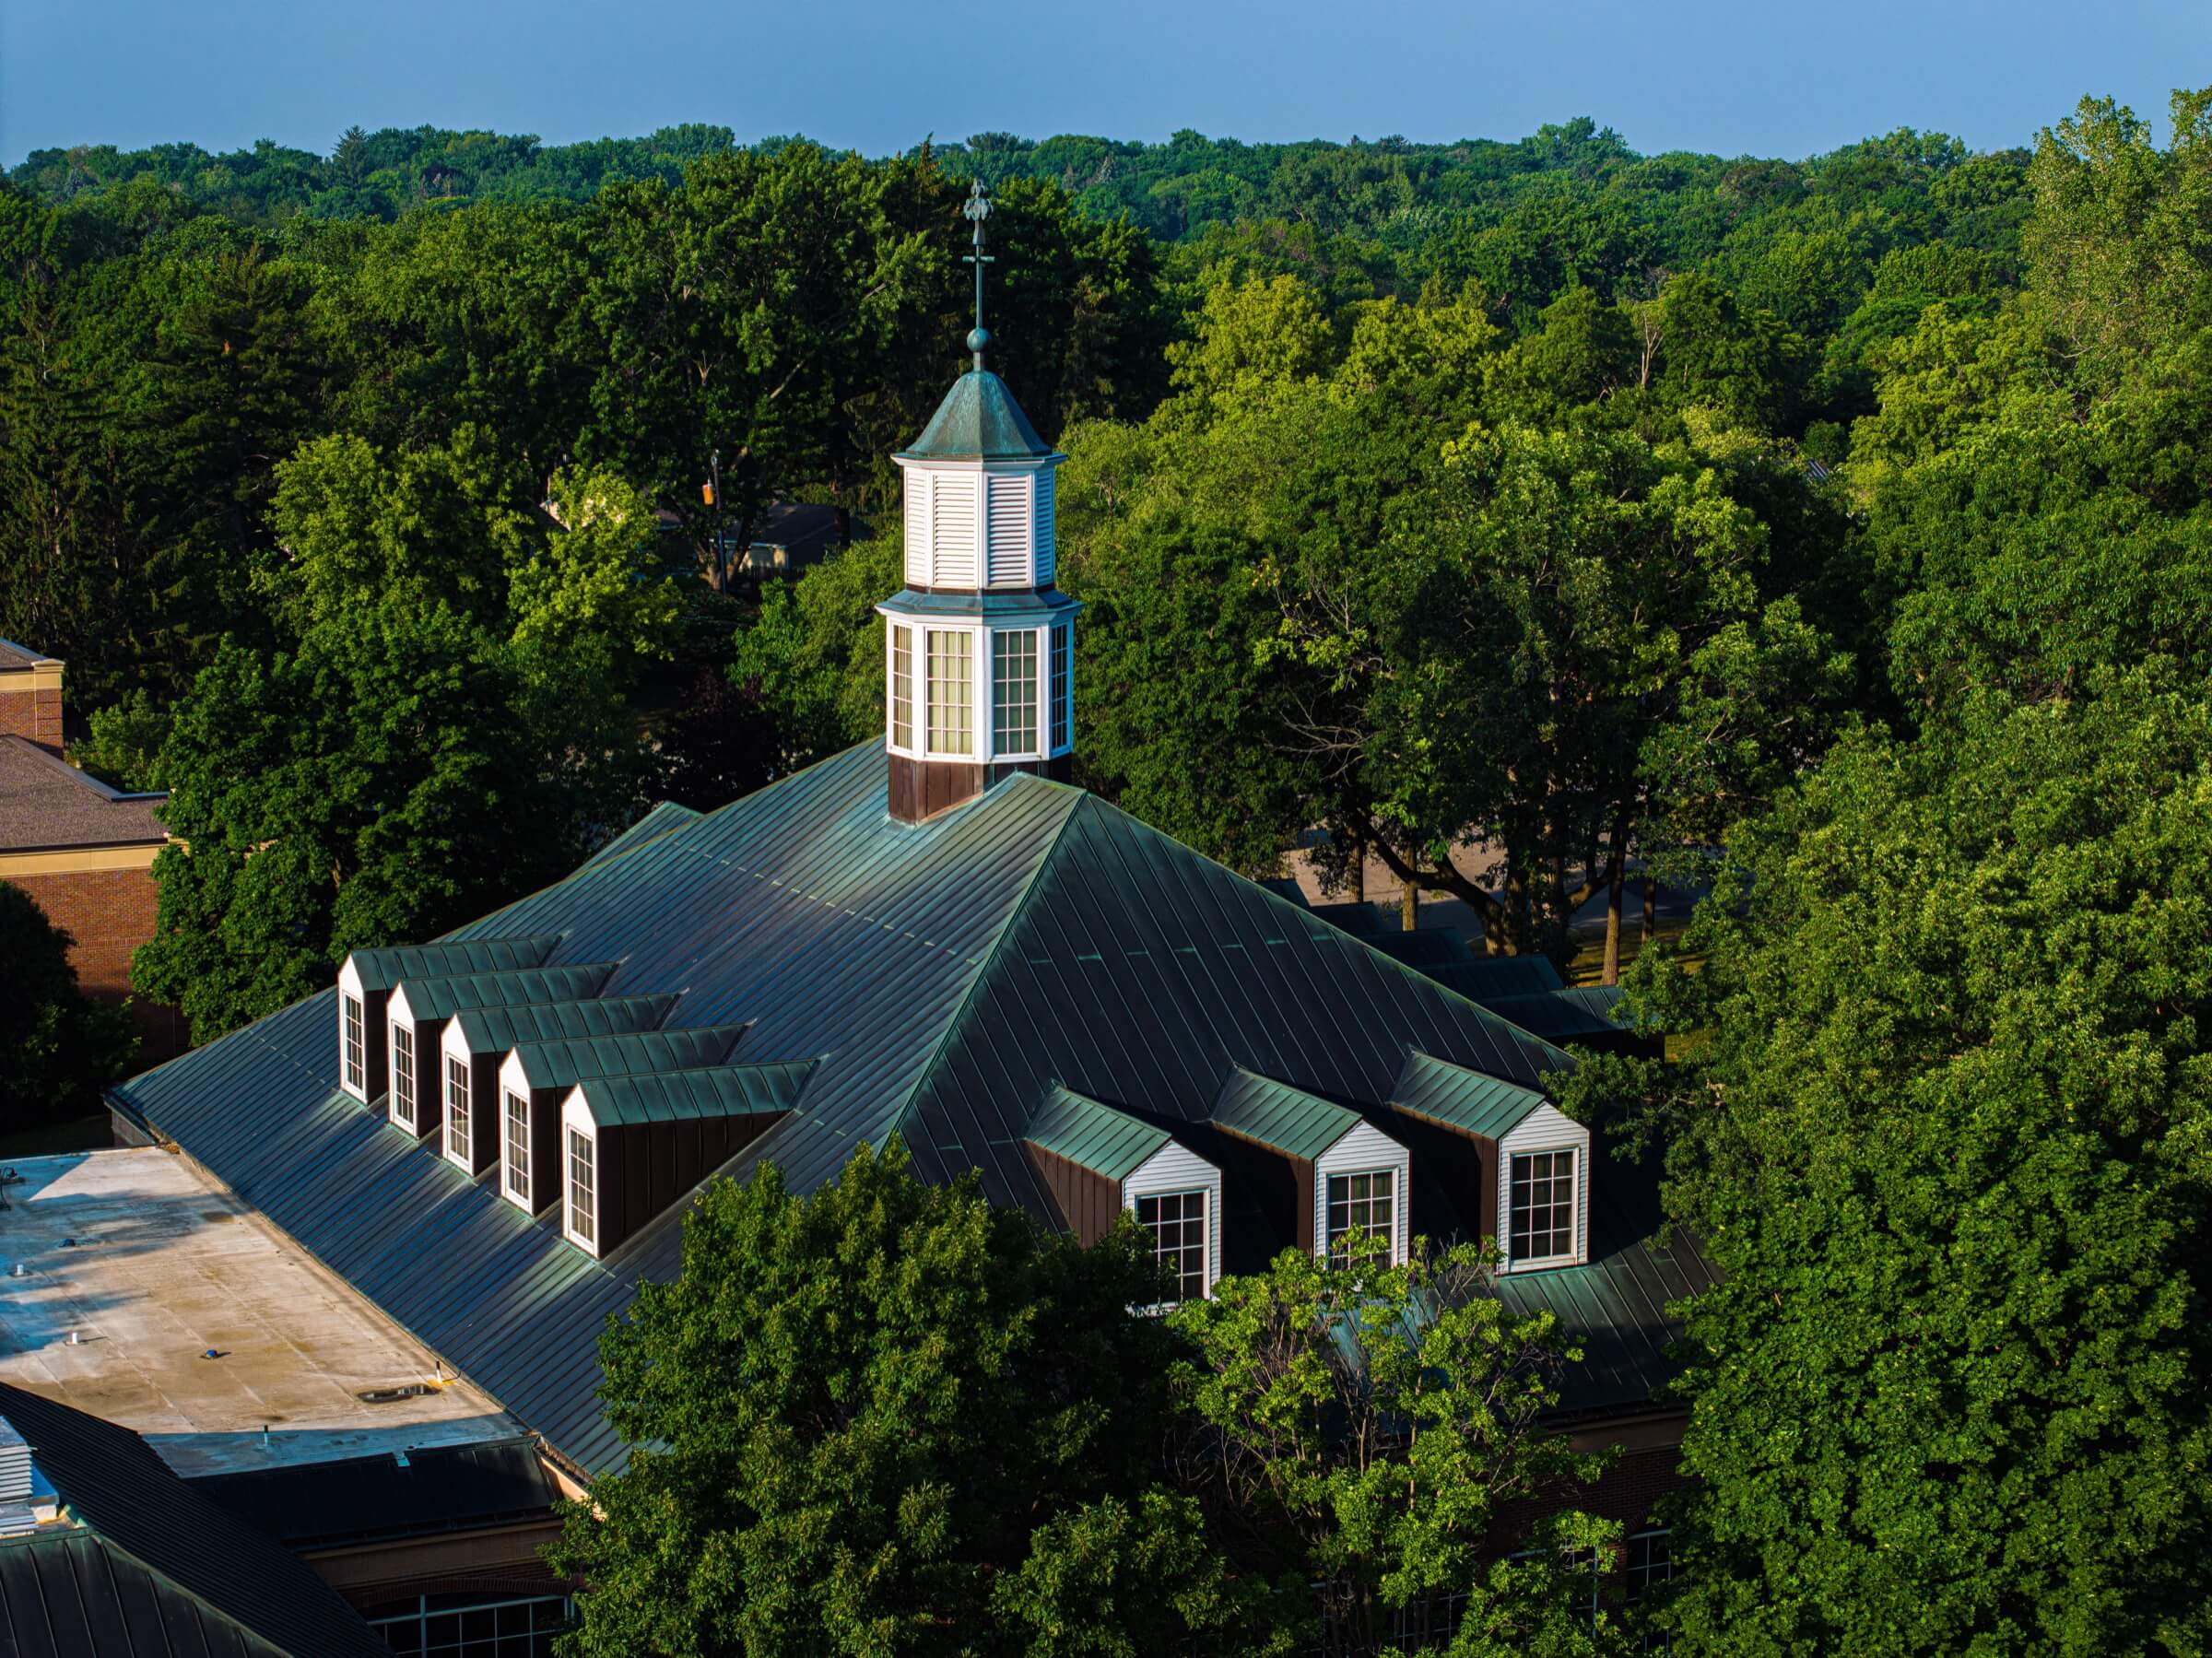 Drone shot showing the green metal rooftop of a church